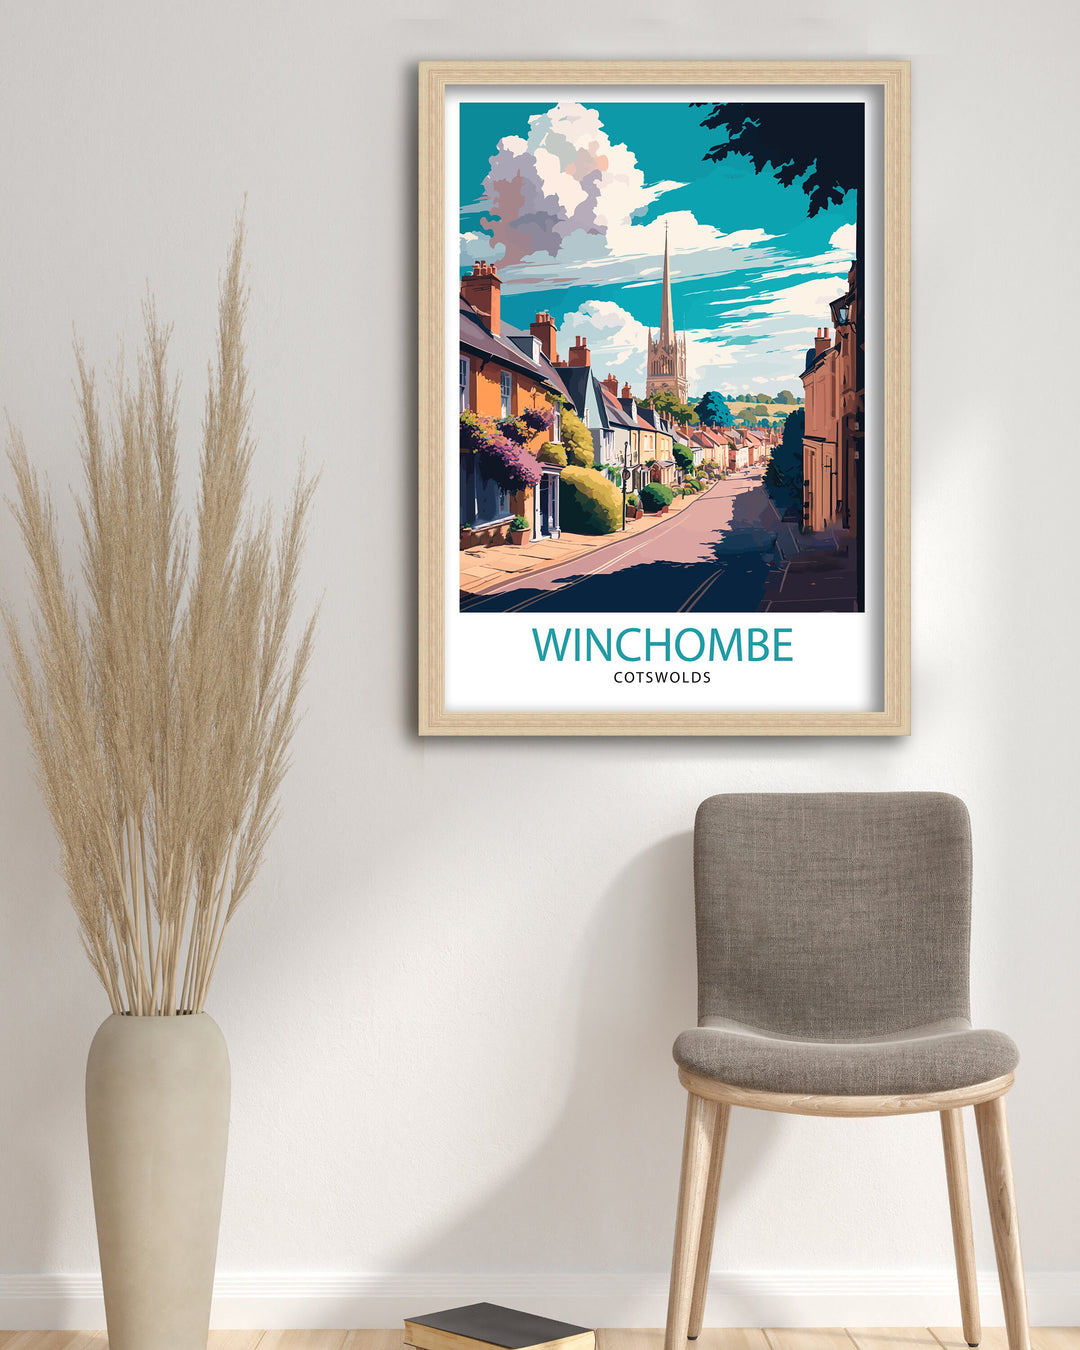 Winchombe Cotswold Travel Poster Winchombe Cotswold Wall Art Winchombe Cotswold Illustration Travel Poster Gift Cotswold England Home Decor